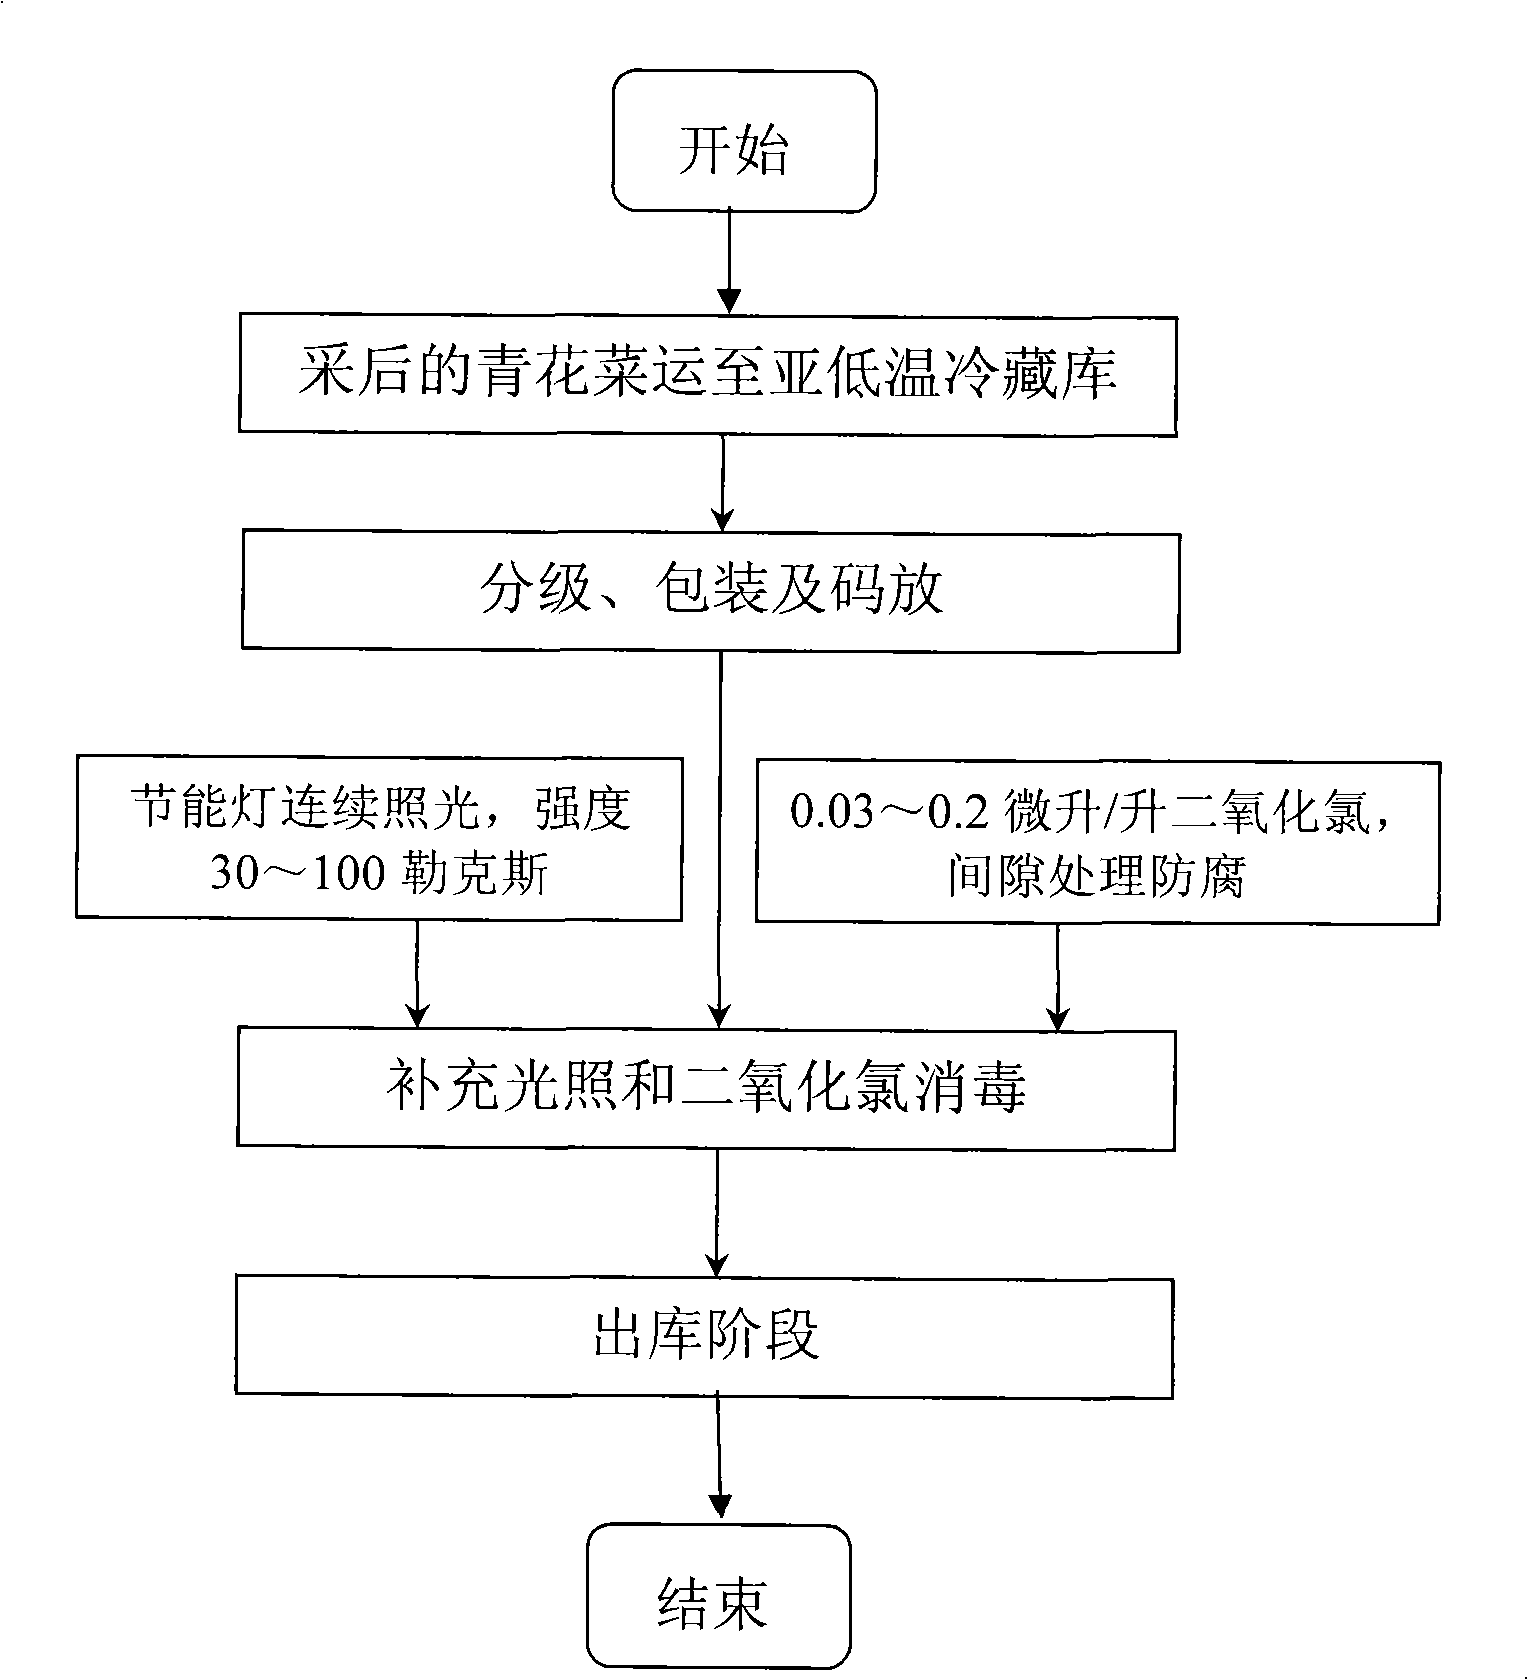 Method for processing broccoli for fresh-keeping using light filling and chlorine dioxide in sub-low-temperature cold-storage